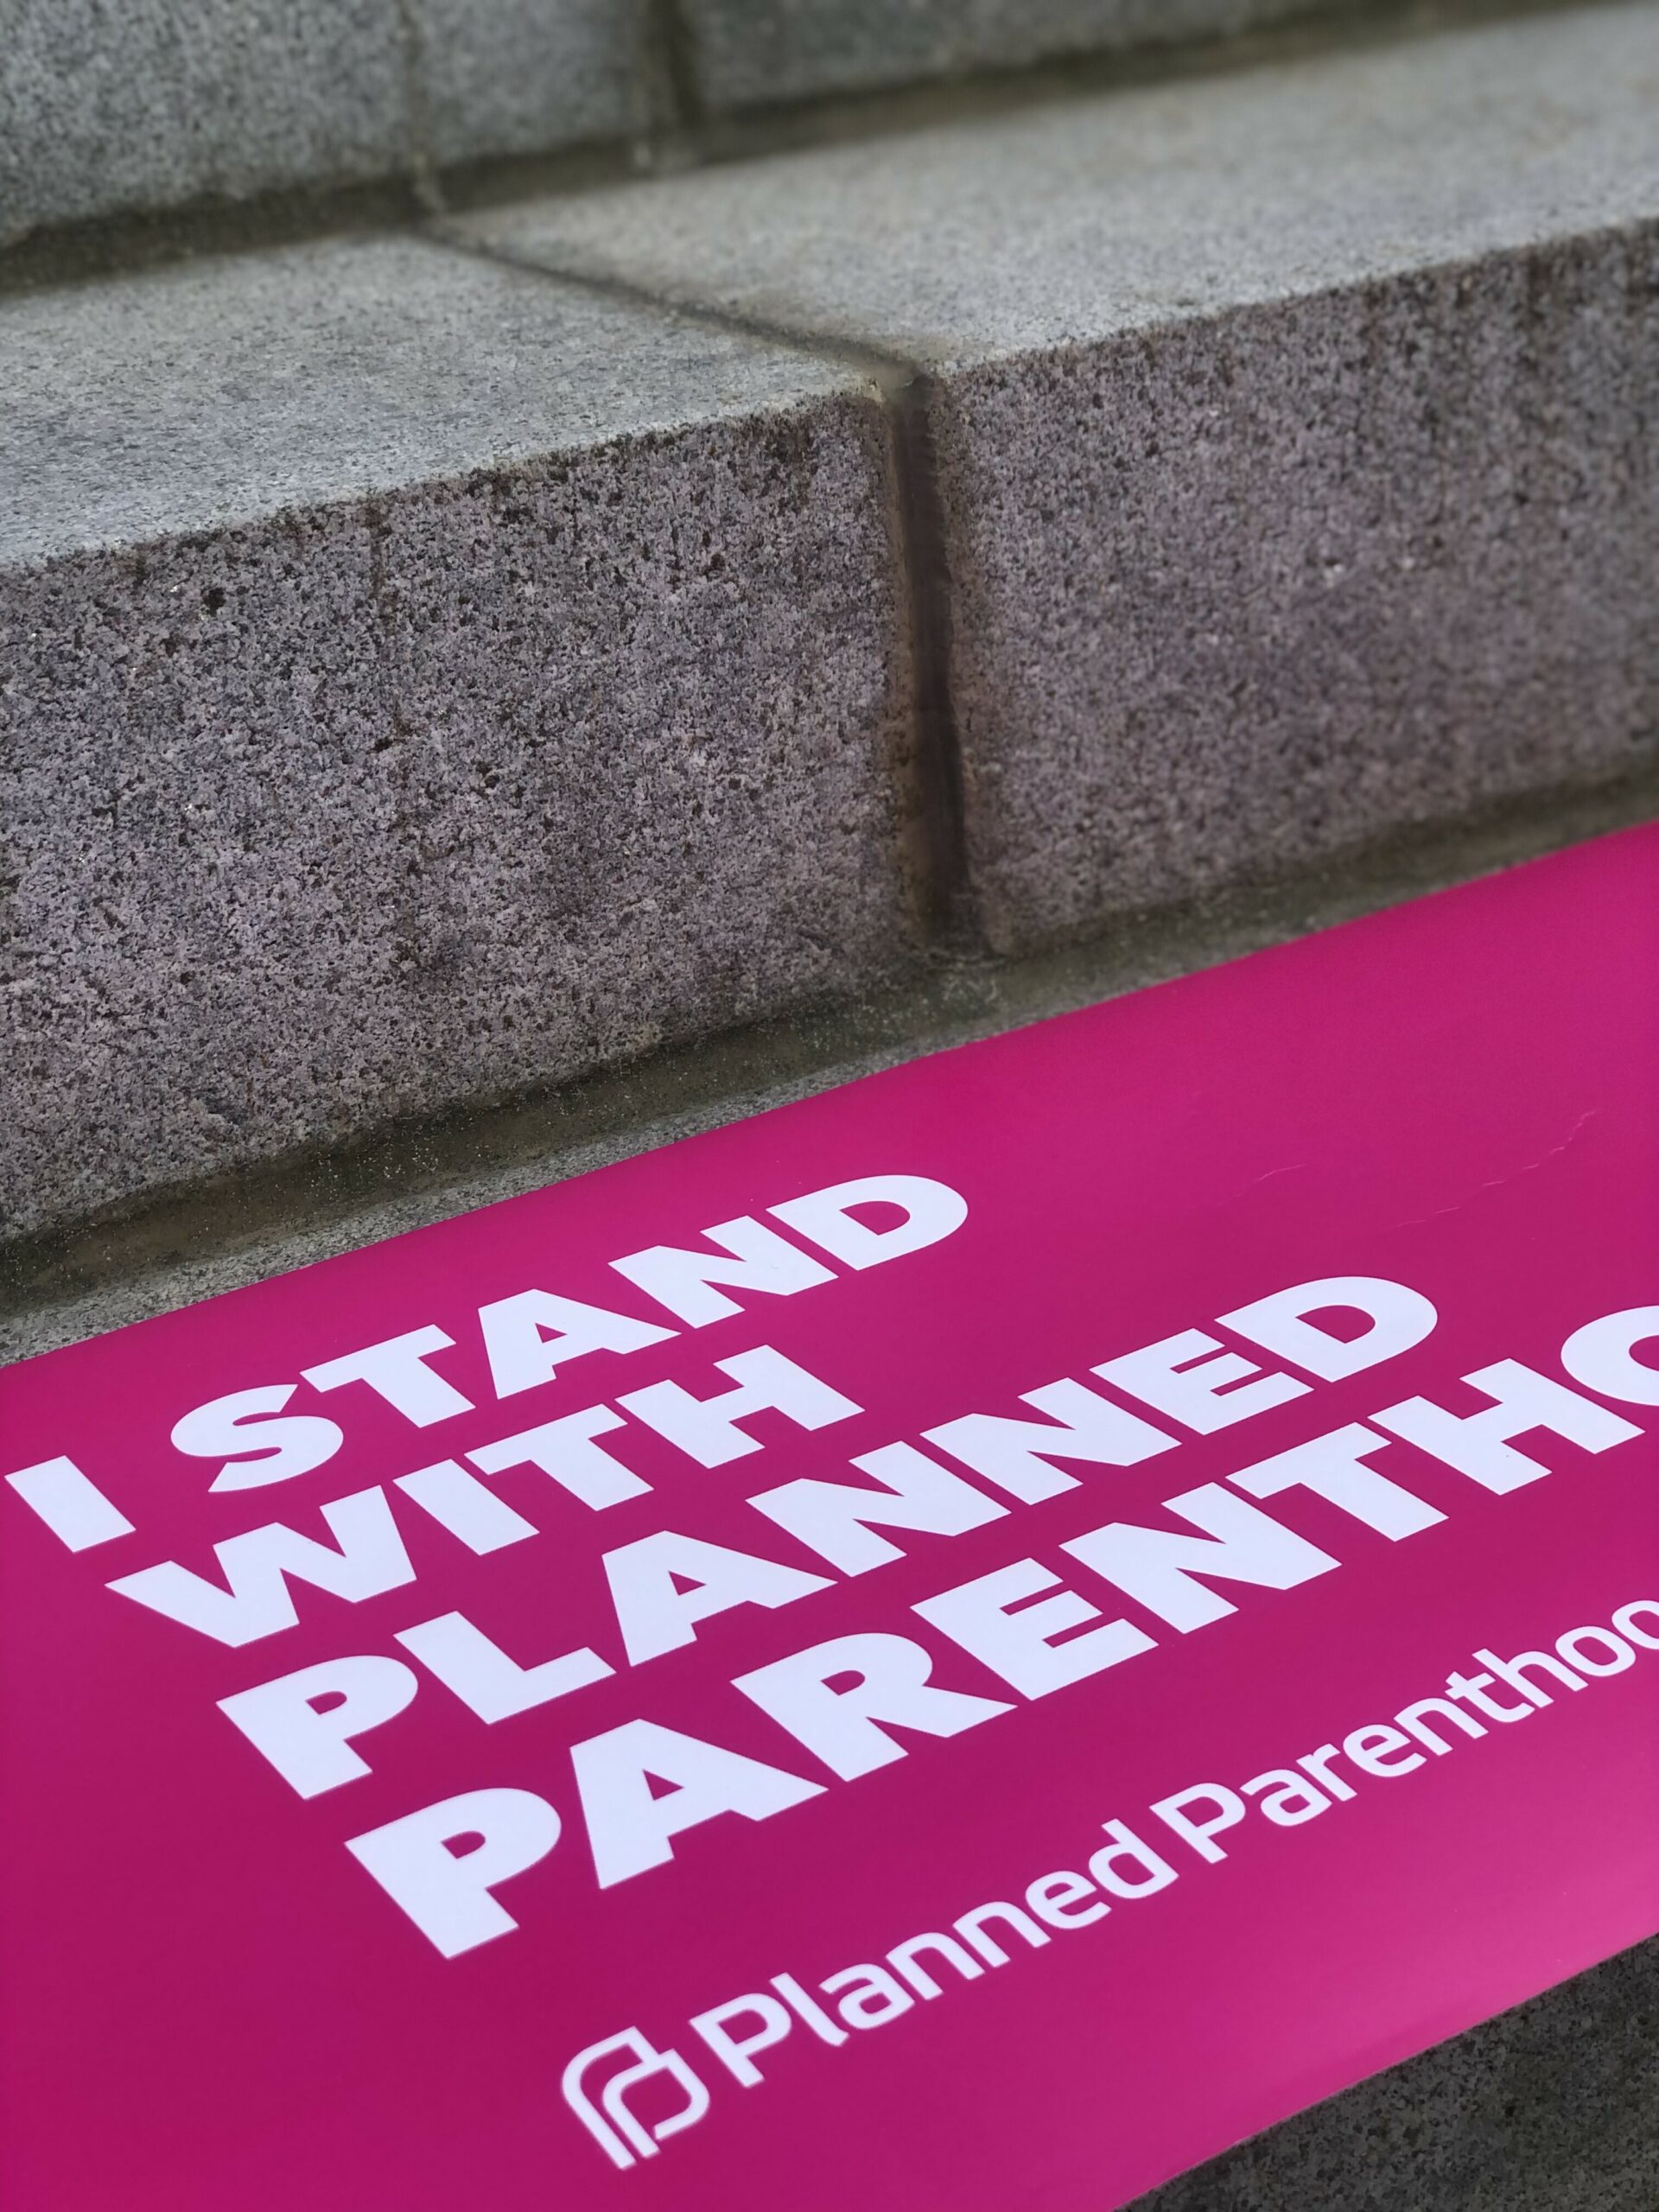 Planned Parenthood Hudson Peconic had a strong presence at the rally.